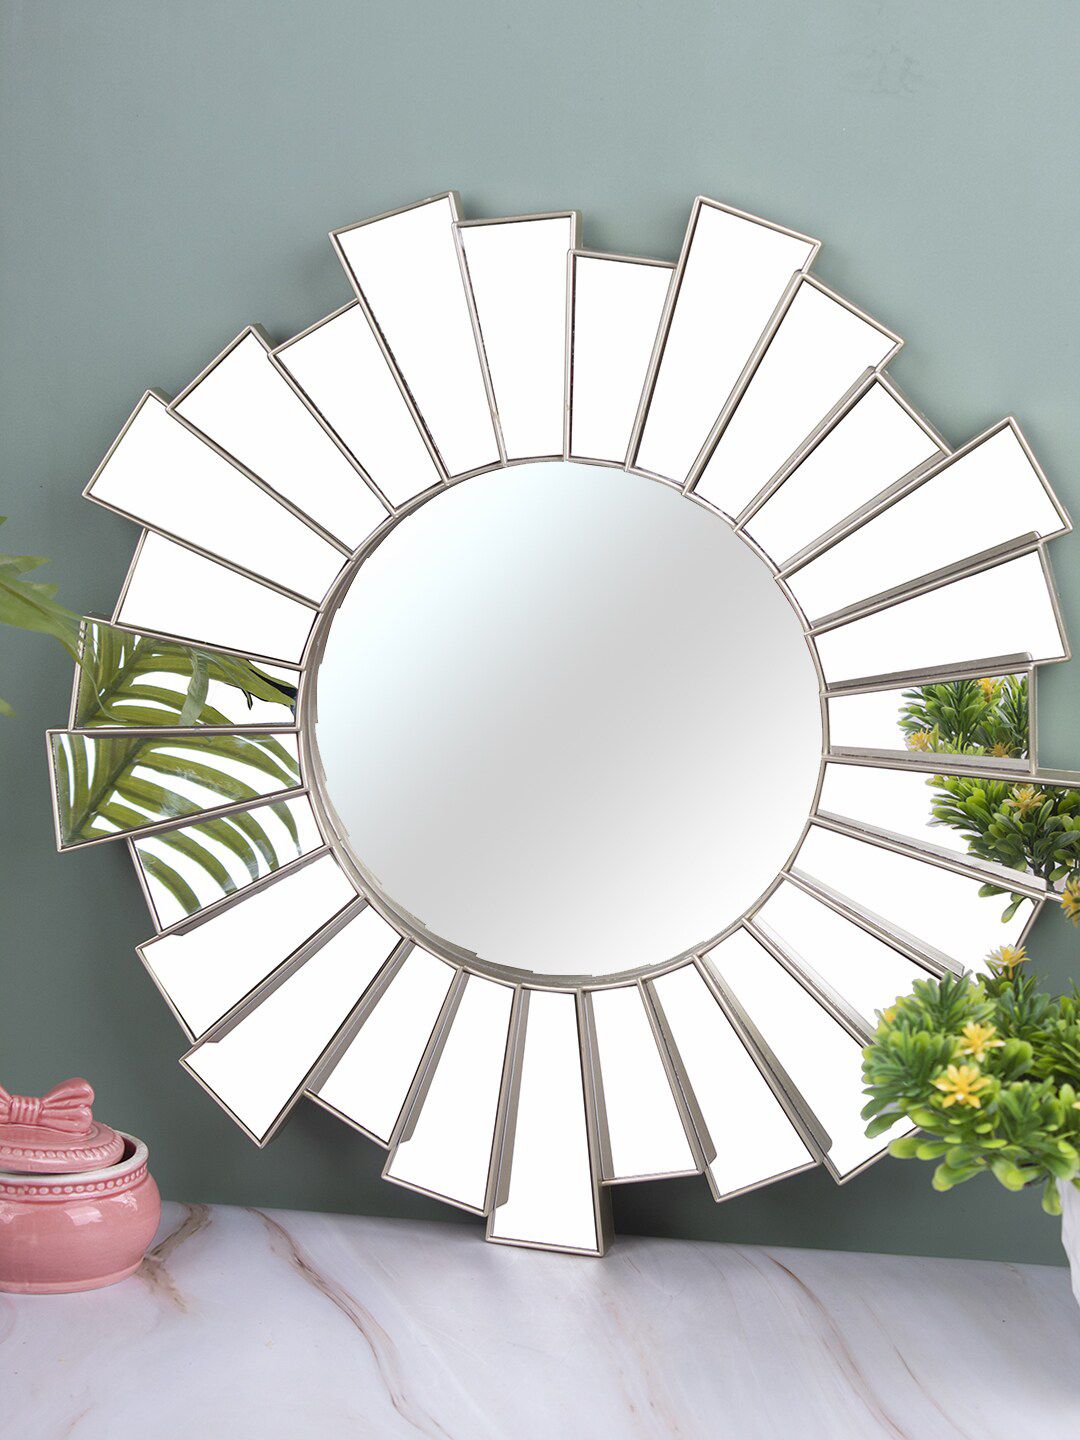 MARKET99 Gold-Toned Round Wall Mirror Price in India